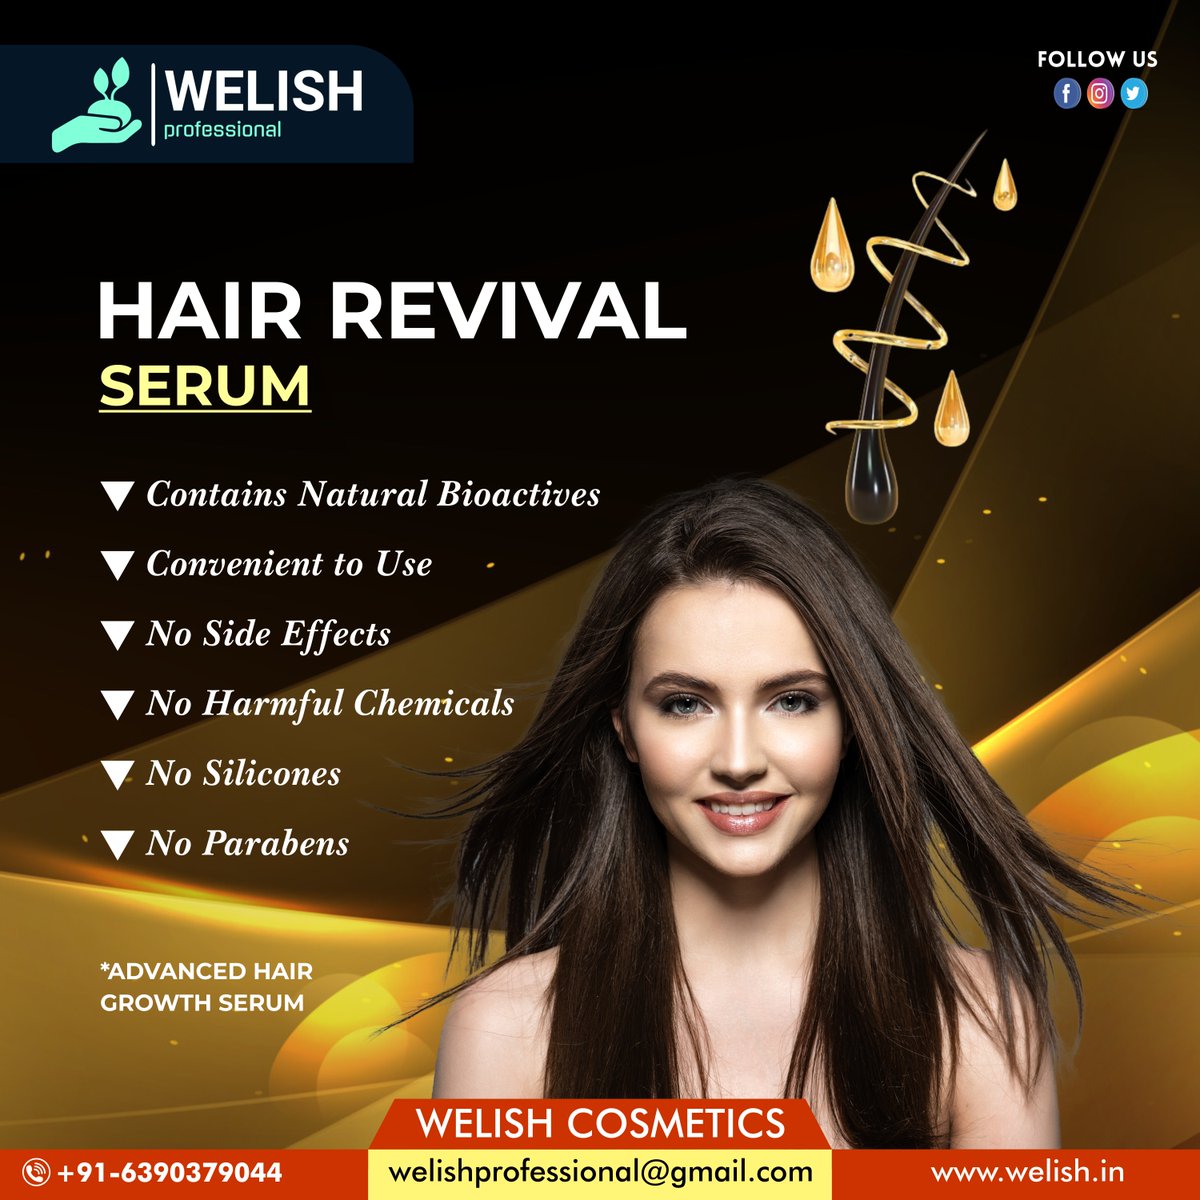 Welish hair revival serum is formulated to address various hair concerns and promote healthier, stronger and more vibrant hair.
☎️Contact Us : 063903 79044
#welish #hairgrowth #antihairfall #oliveserum #hairrevivalserum #hairrevival #hairrepair #serum #Tiger3Teaser